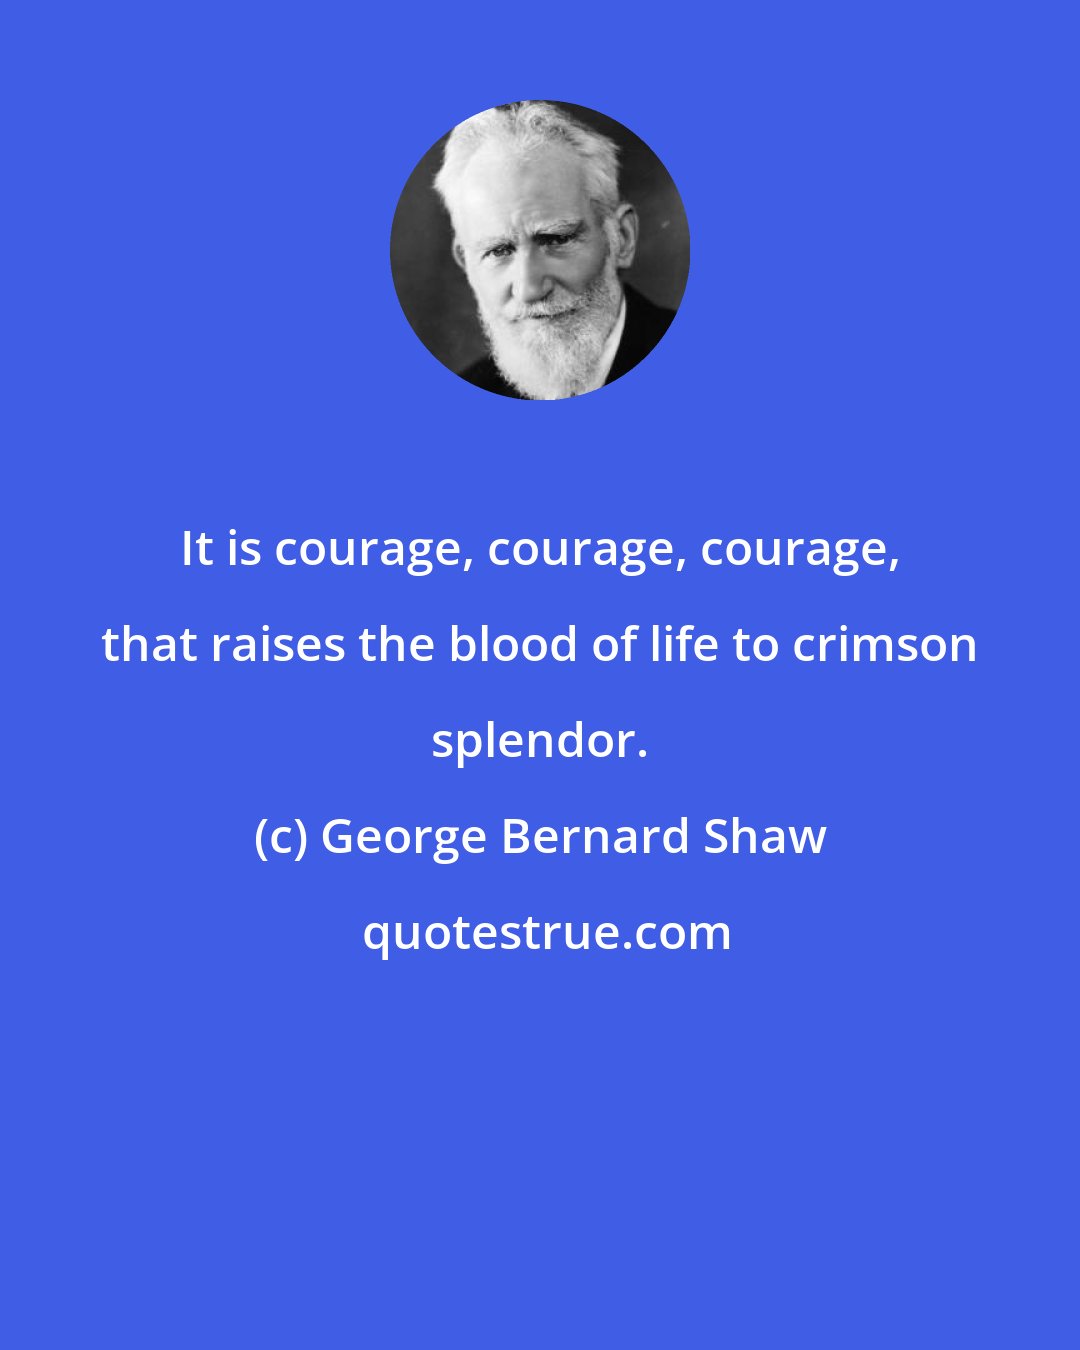 George Bernard Shaw: It is courage, courage, courage, that raises the blood of life to crimson splendor.